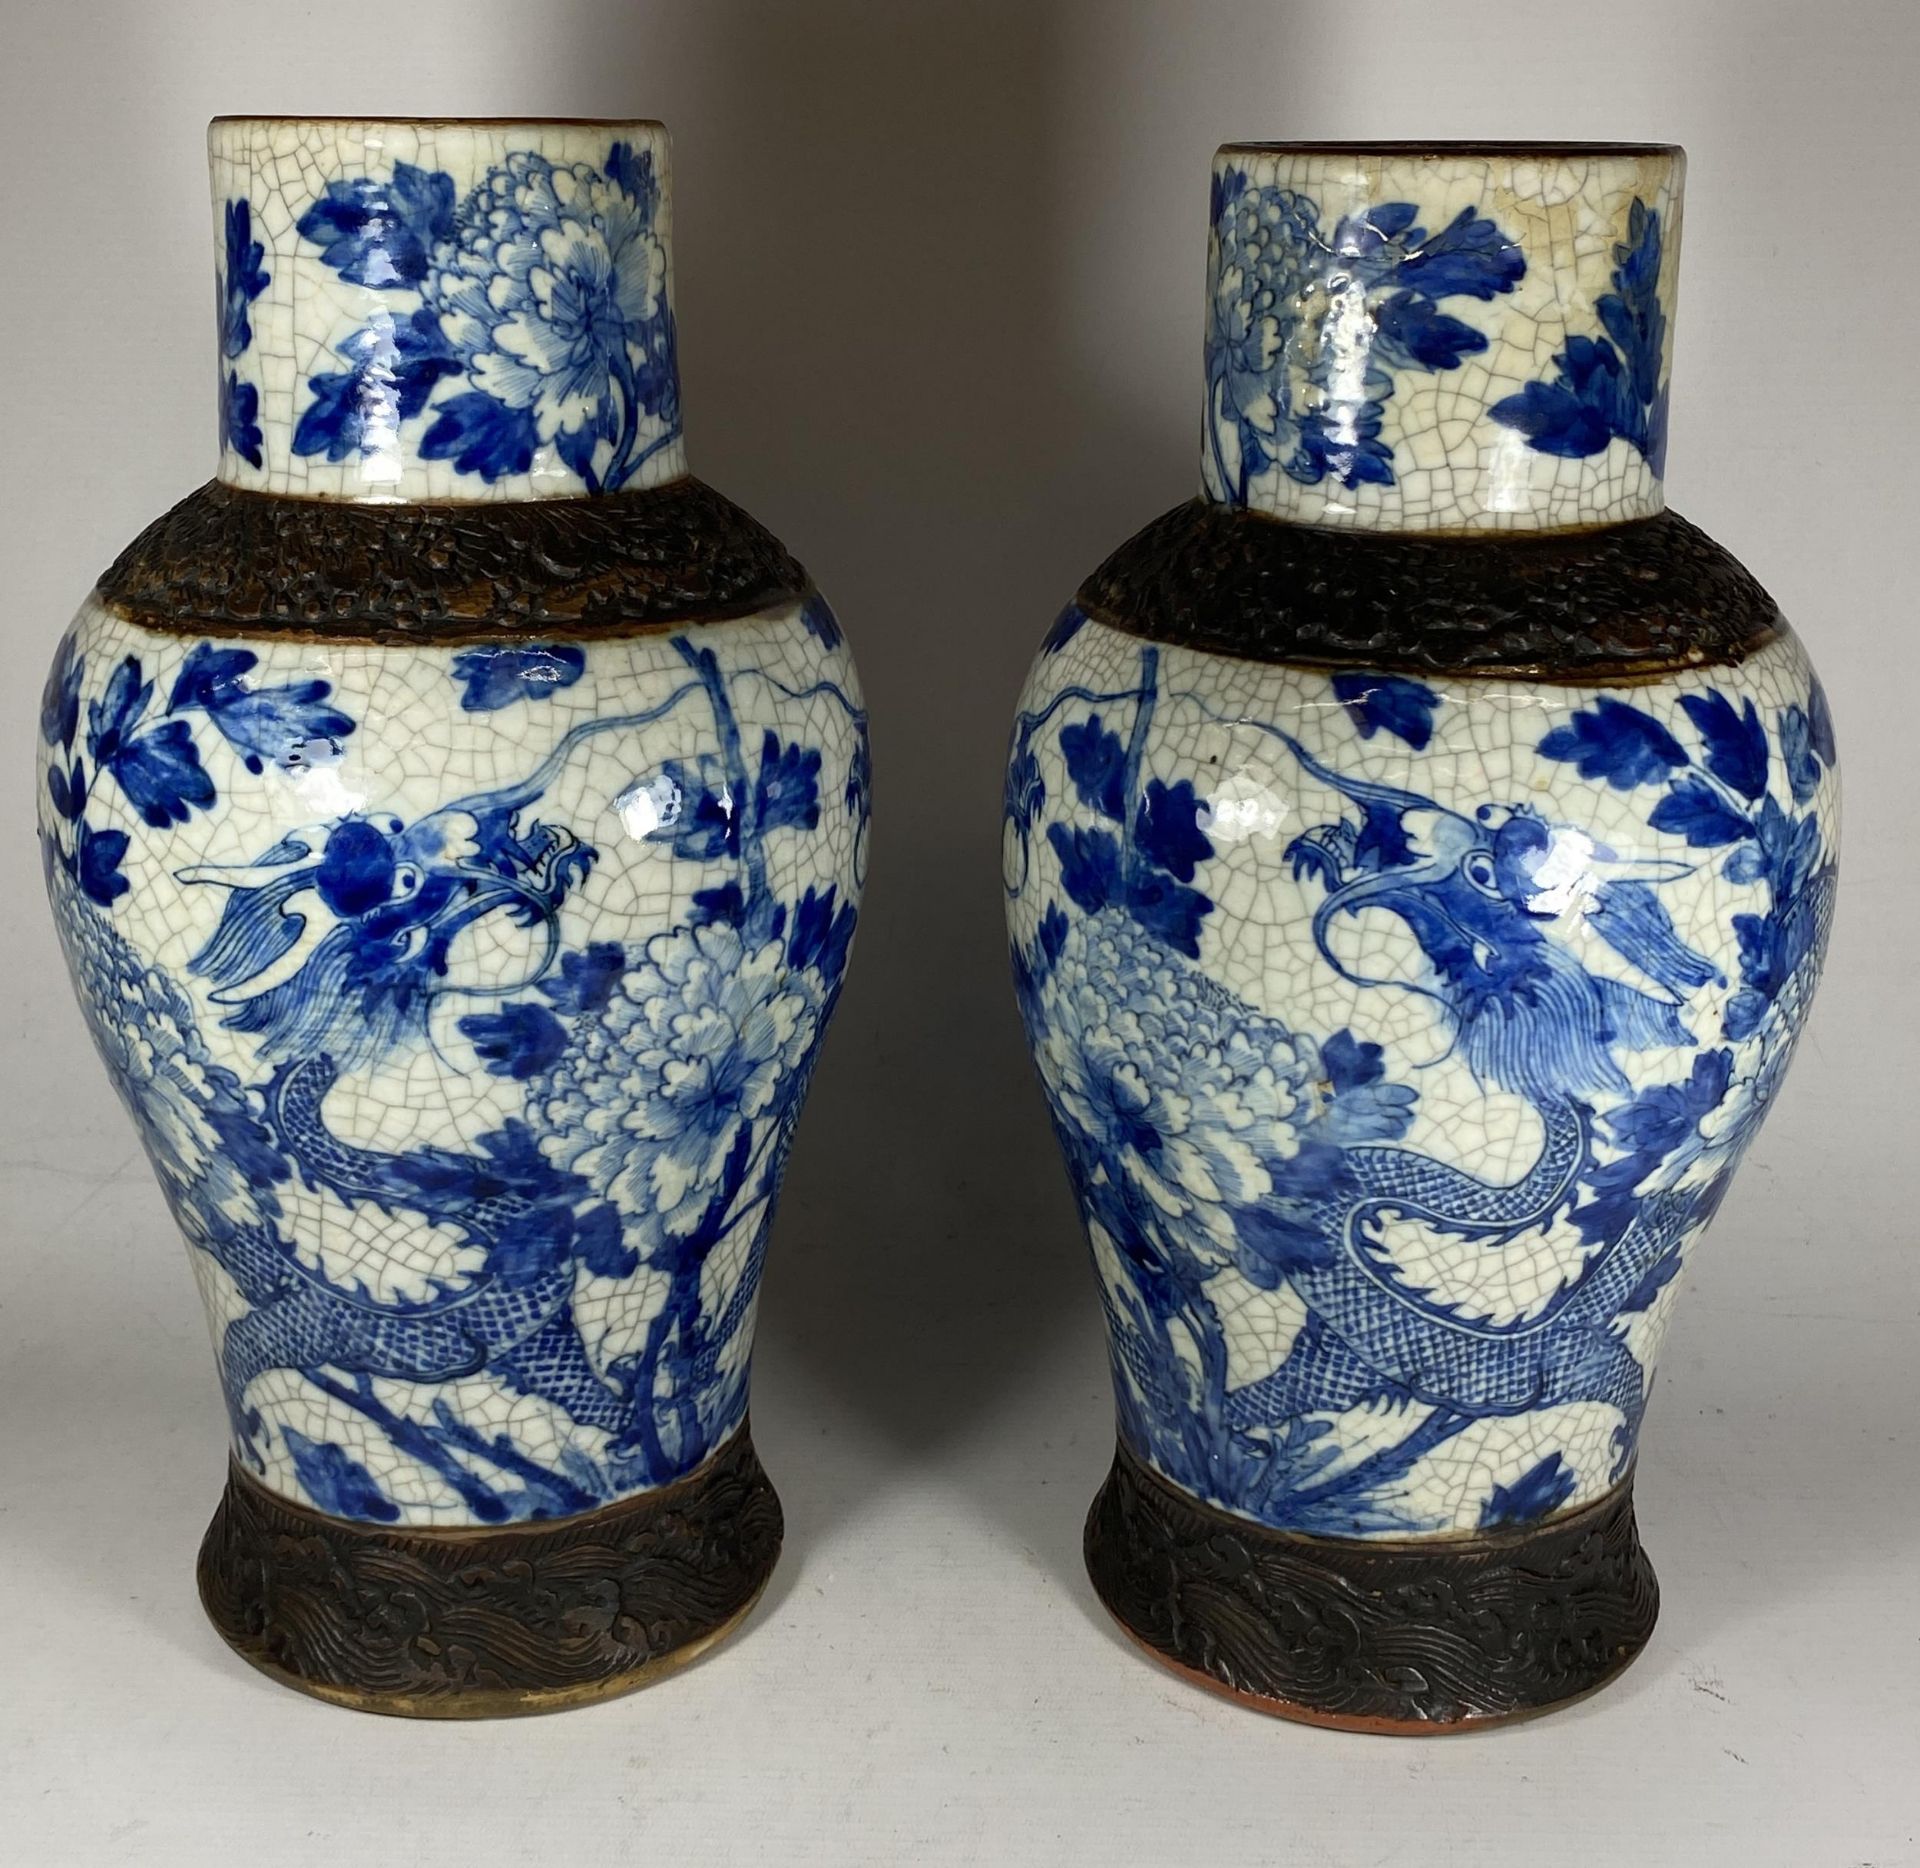 A PAIR OF EARLY 20TH CENTURY CHINESE BLUE AND WHITE CRACKLE GLAZE DRAGON DESIGN VASES, A/F, HEIGHT